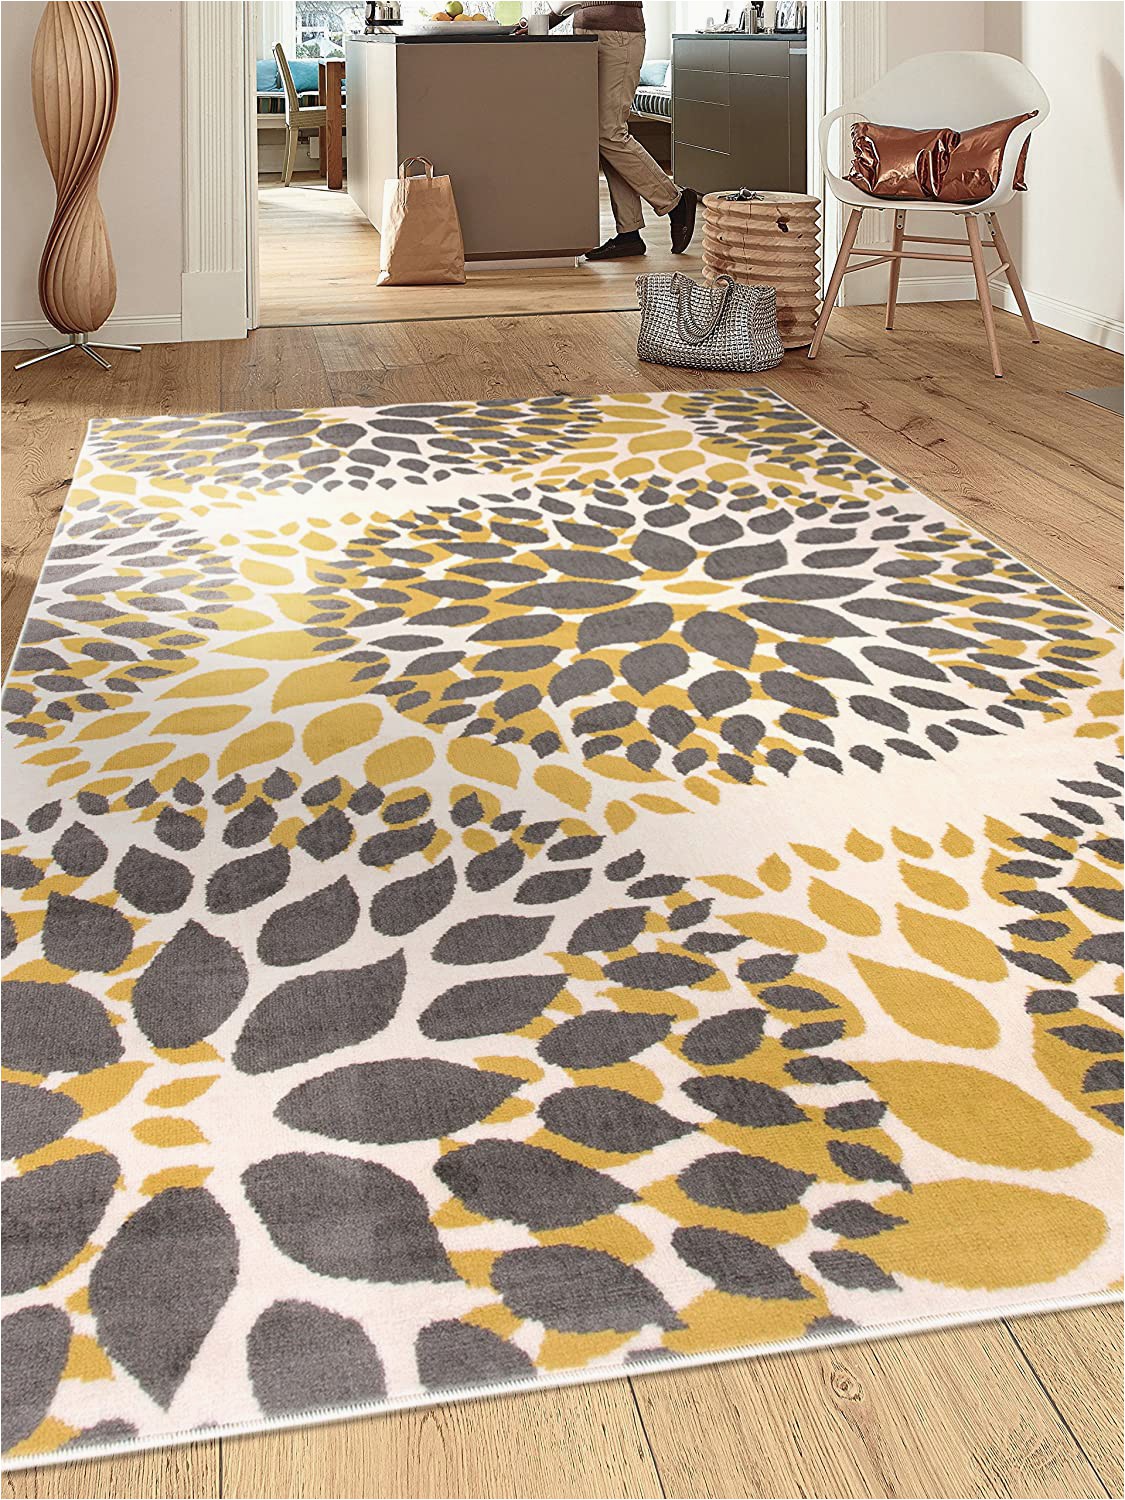 Black Grey and Yellow area Rug Modern Floral Circles Design area Rugs 7 6" X 9 5" Yellow